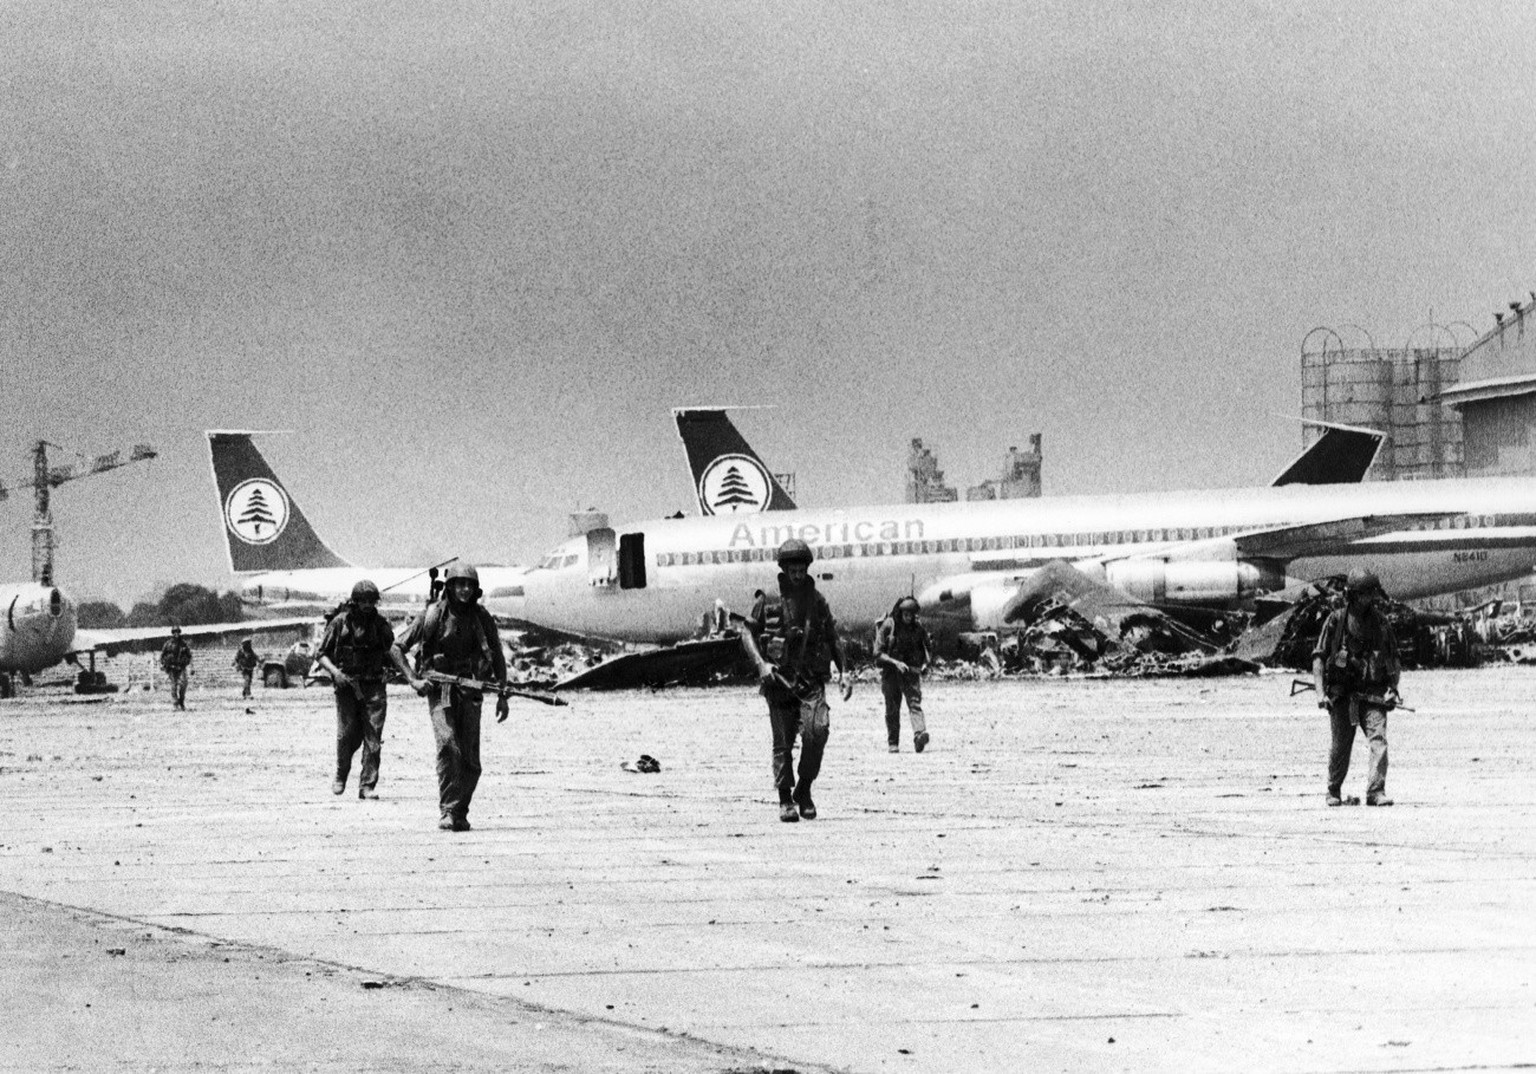 Israeli soldiers patrol the tarmac of Beirut International Airport, on Aug. 4, 1982, as fighting between the PLO and Israeli forces contunues after Israeli troops attack PLO positions around the besie ...